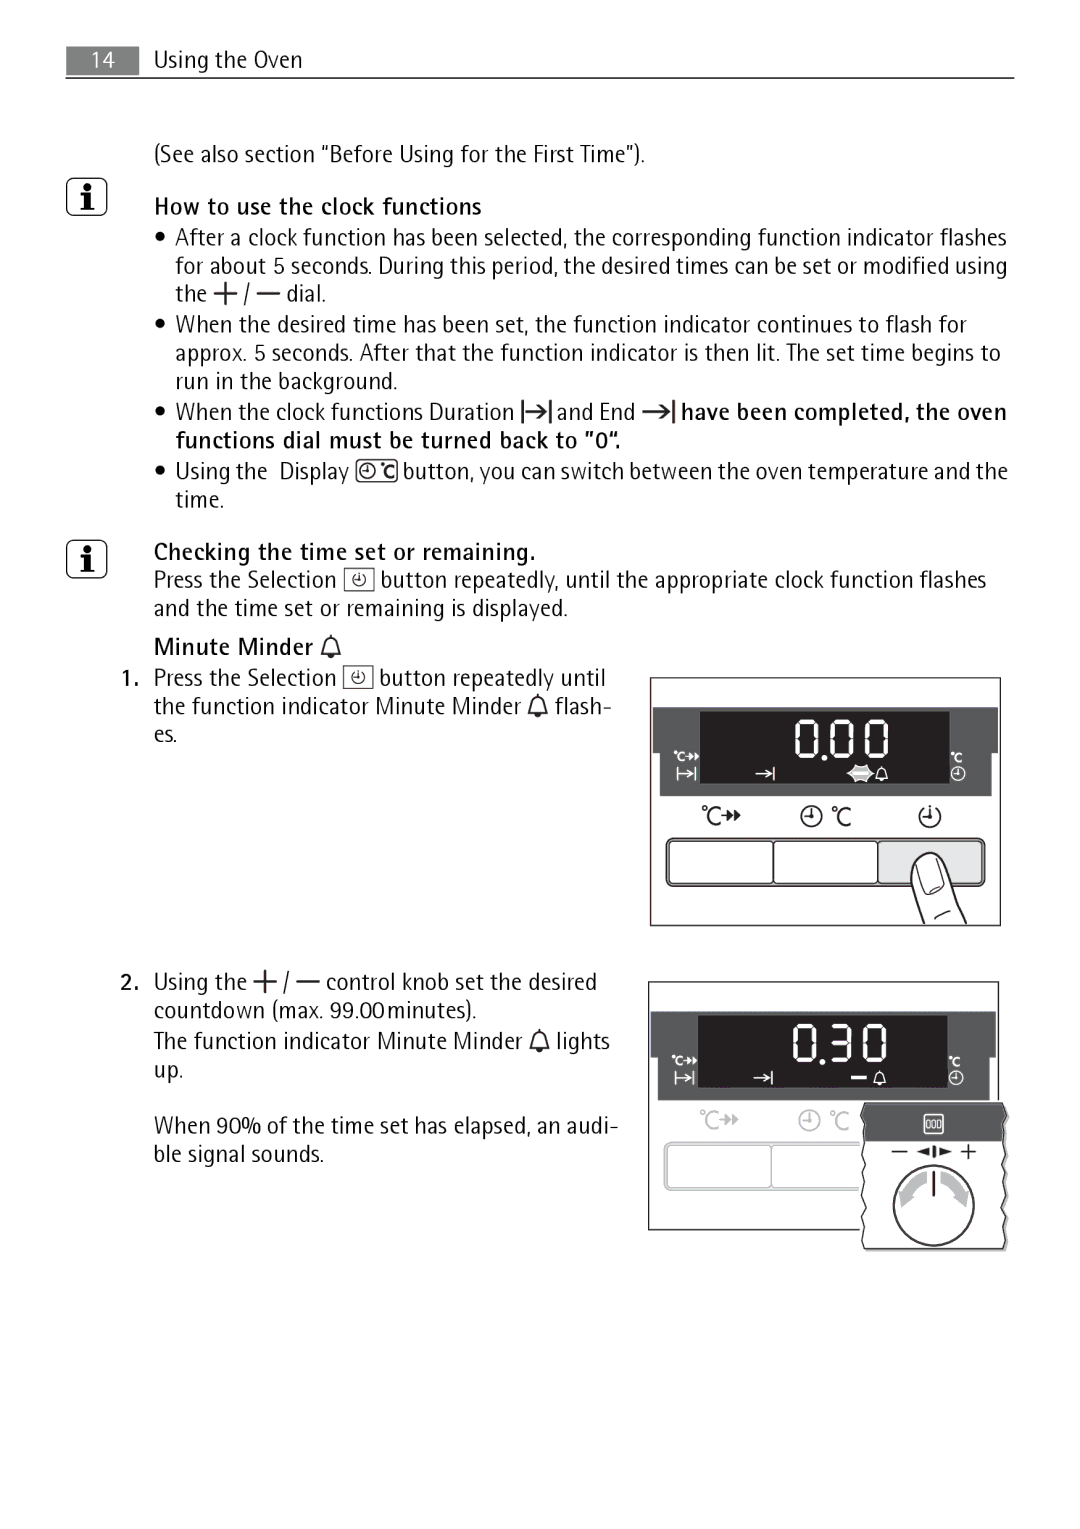 Electrolux B5741-5 user manual How to use the clock functions, Checking the time set or remaining 